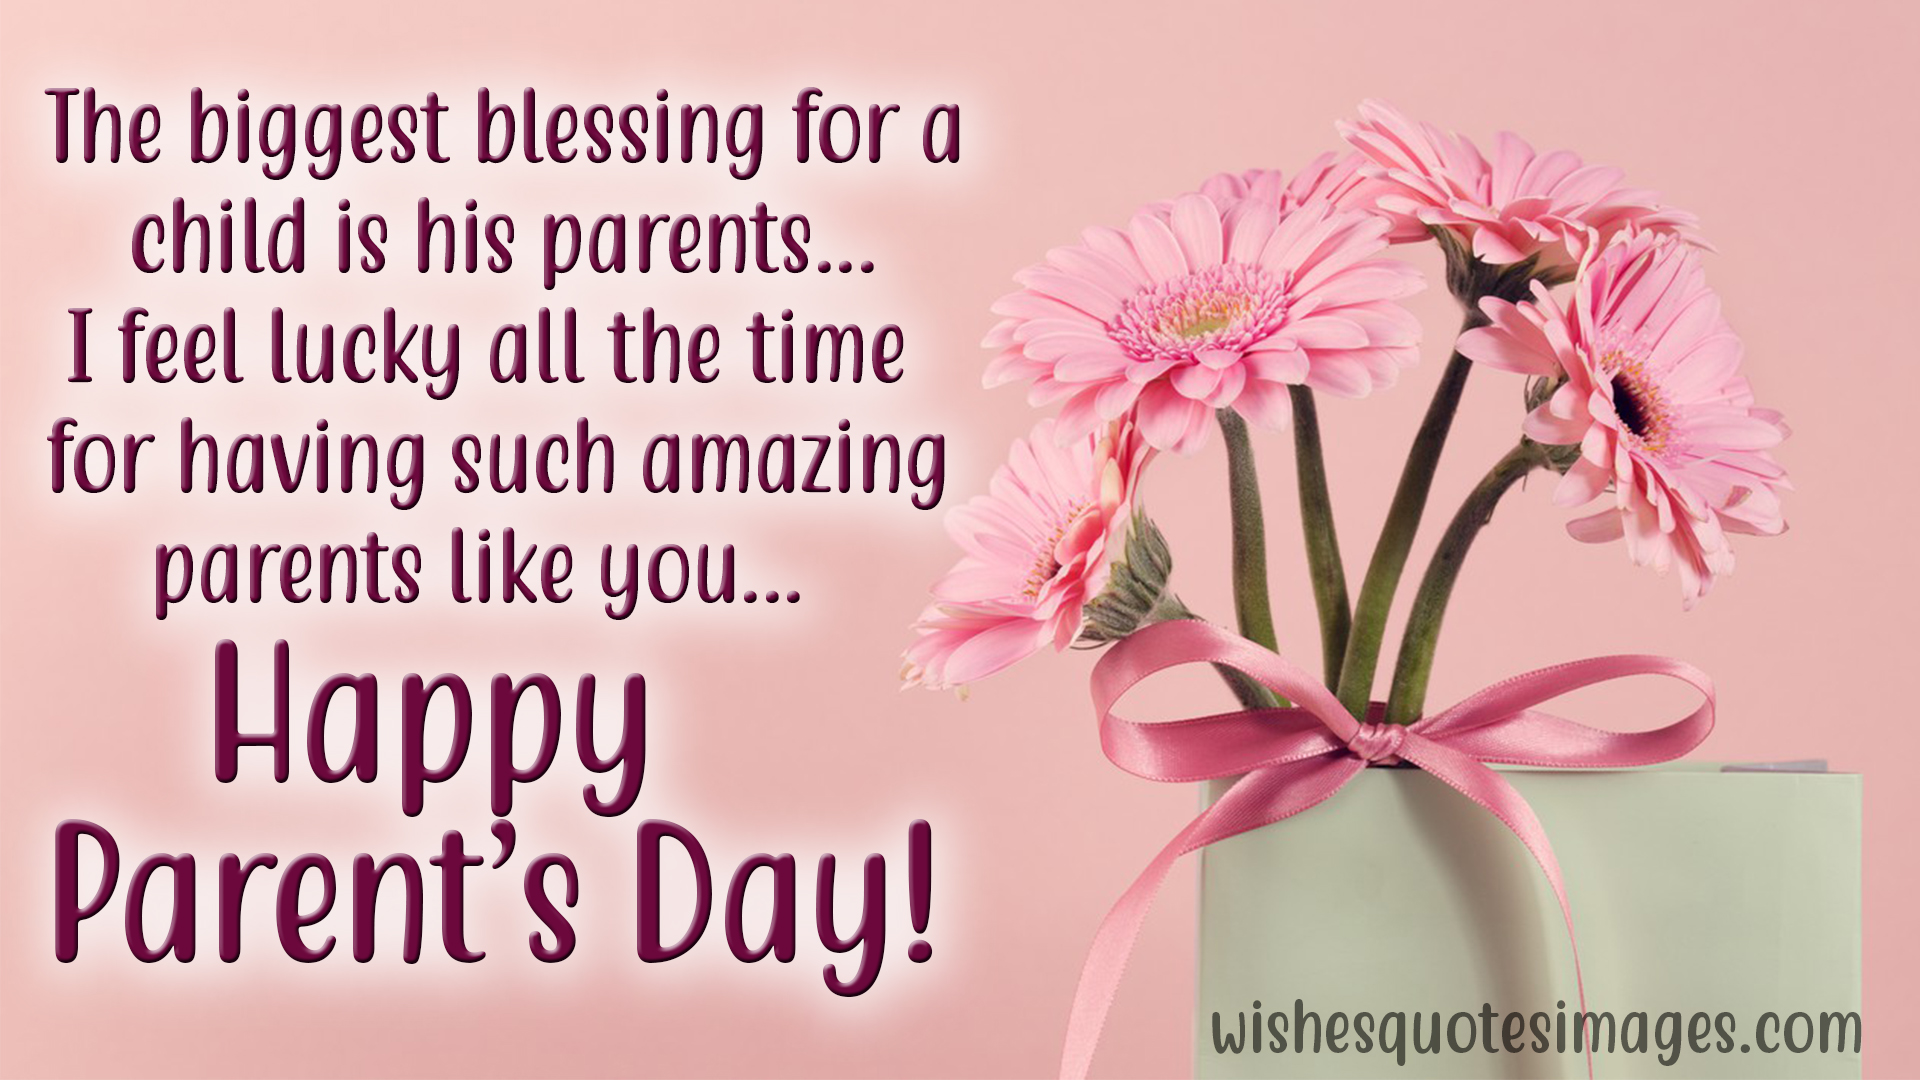 parents day wishes hd image